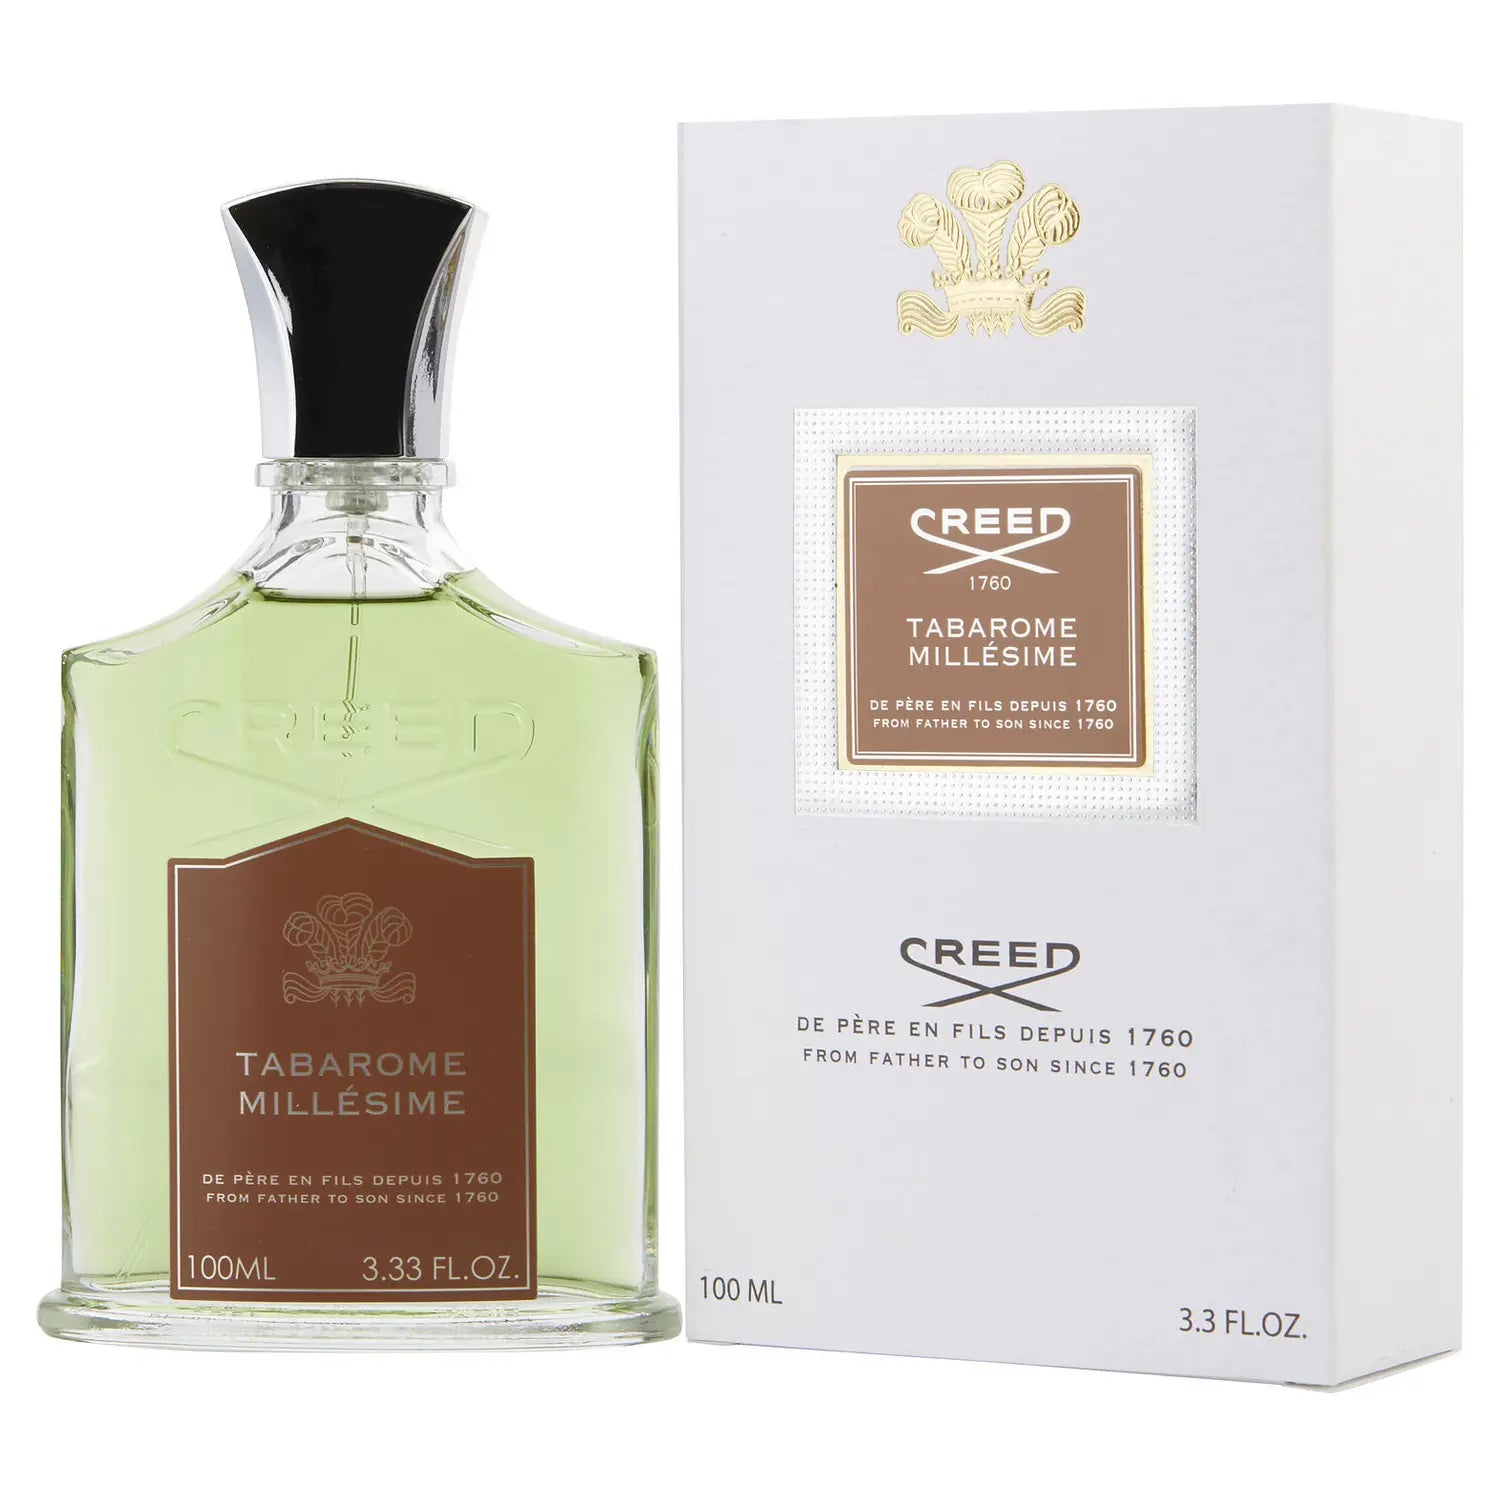 Tabarome Millesime by Creed 3.3 oz EDP Spray for Men